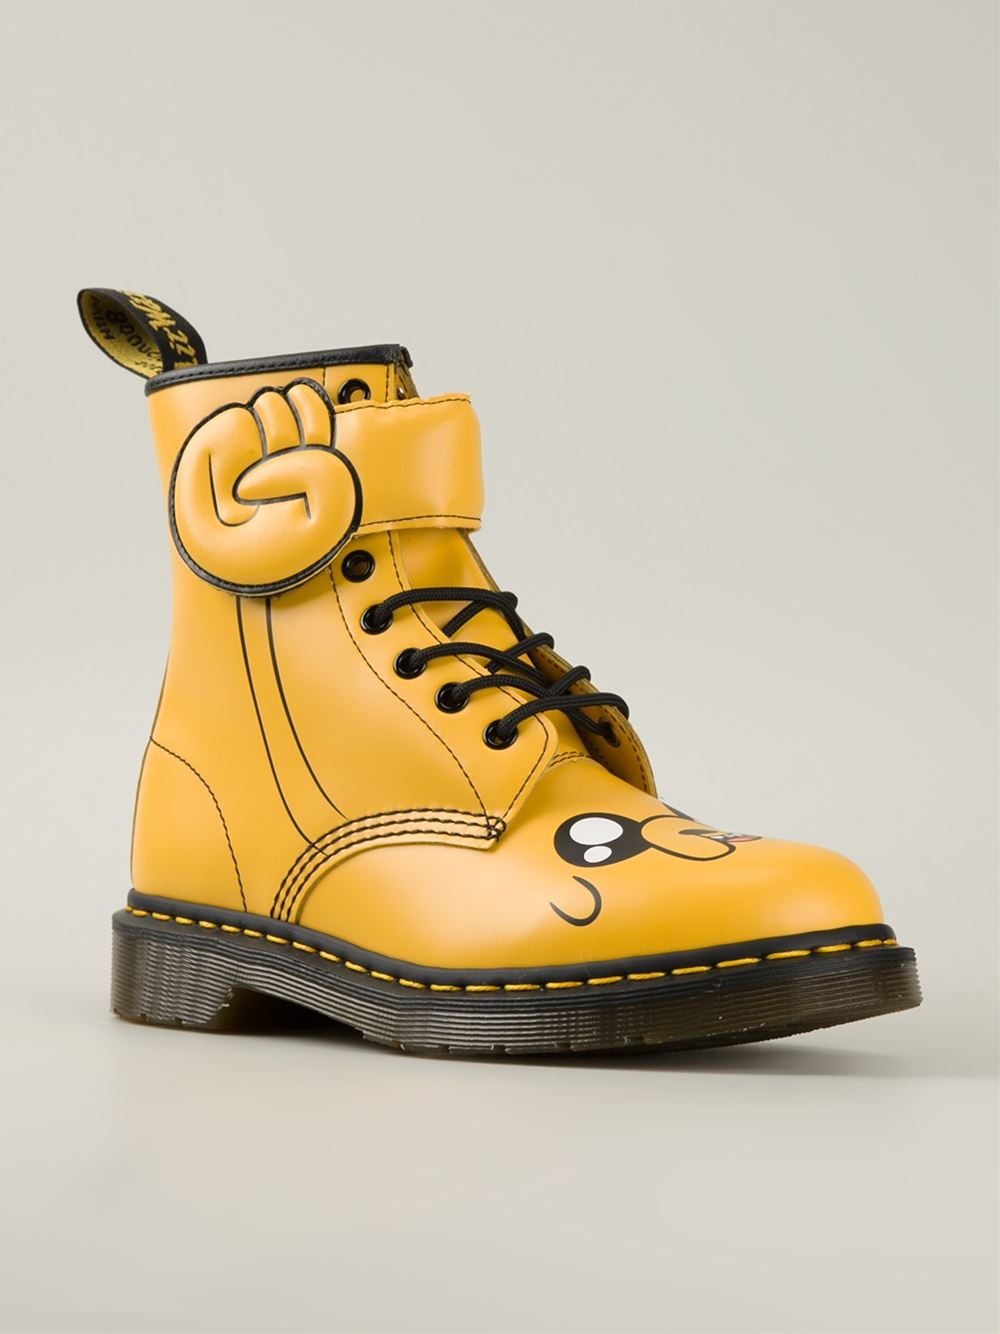 Dr. Martens Adventure Time X Dr.martens 'jake' Boots in Yellow - Lyst